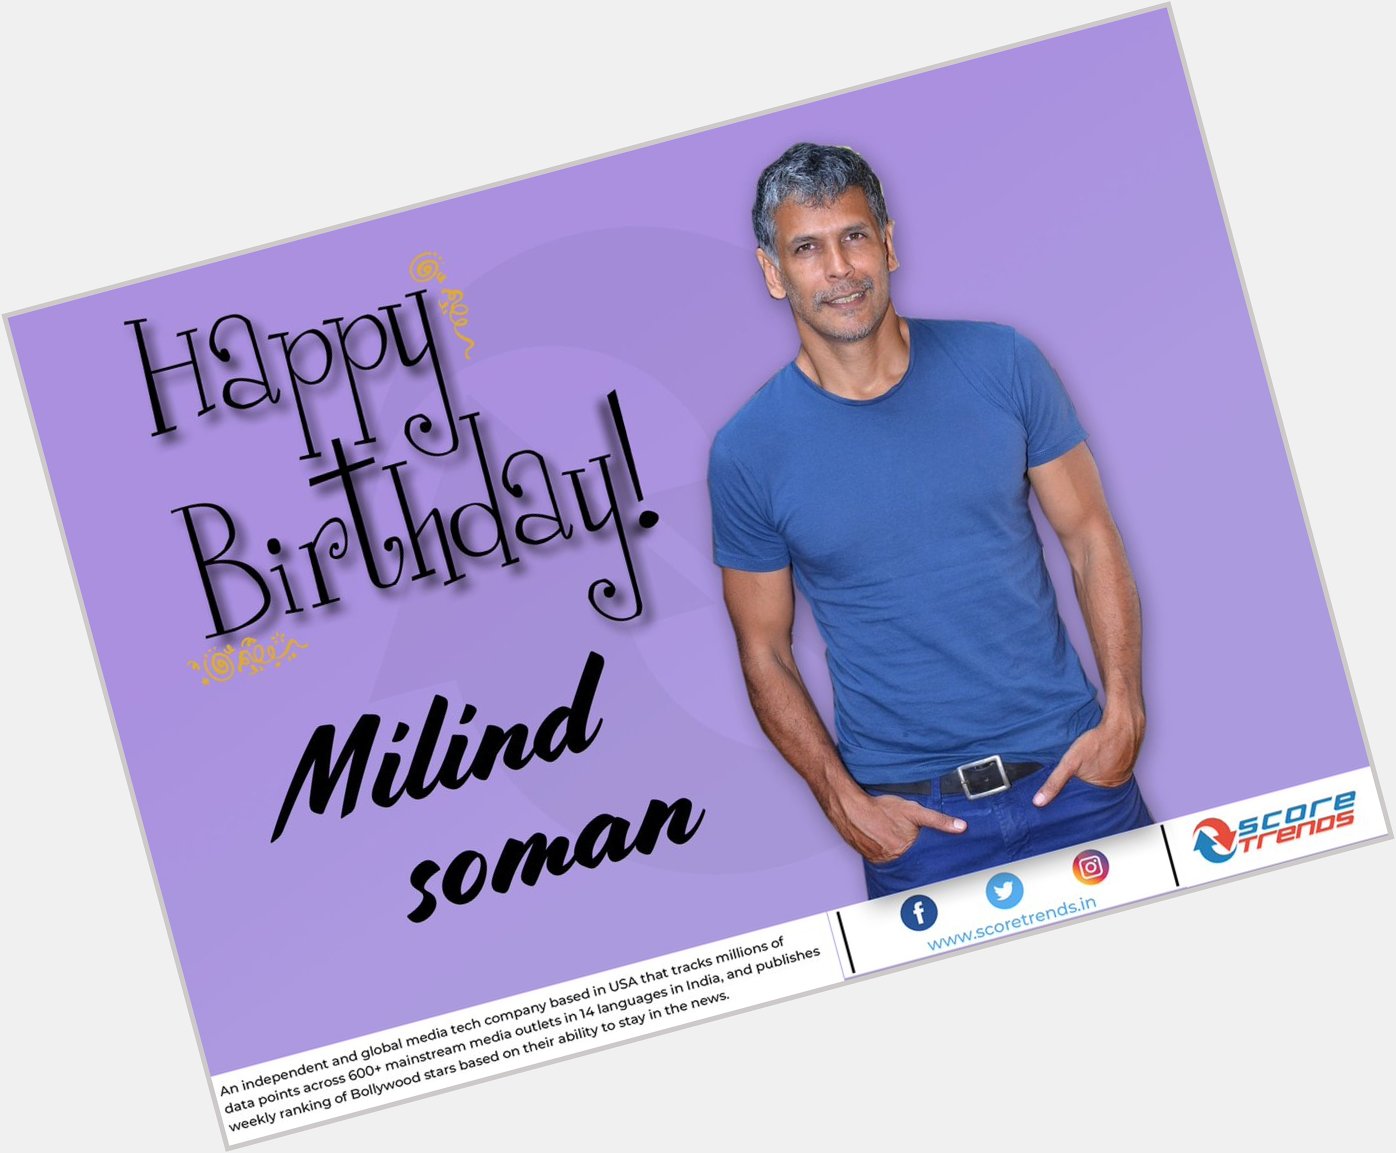 Score Trends wishes Milind Soman a Happy Birthday!! 